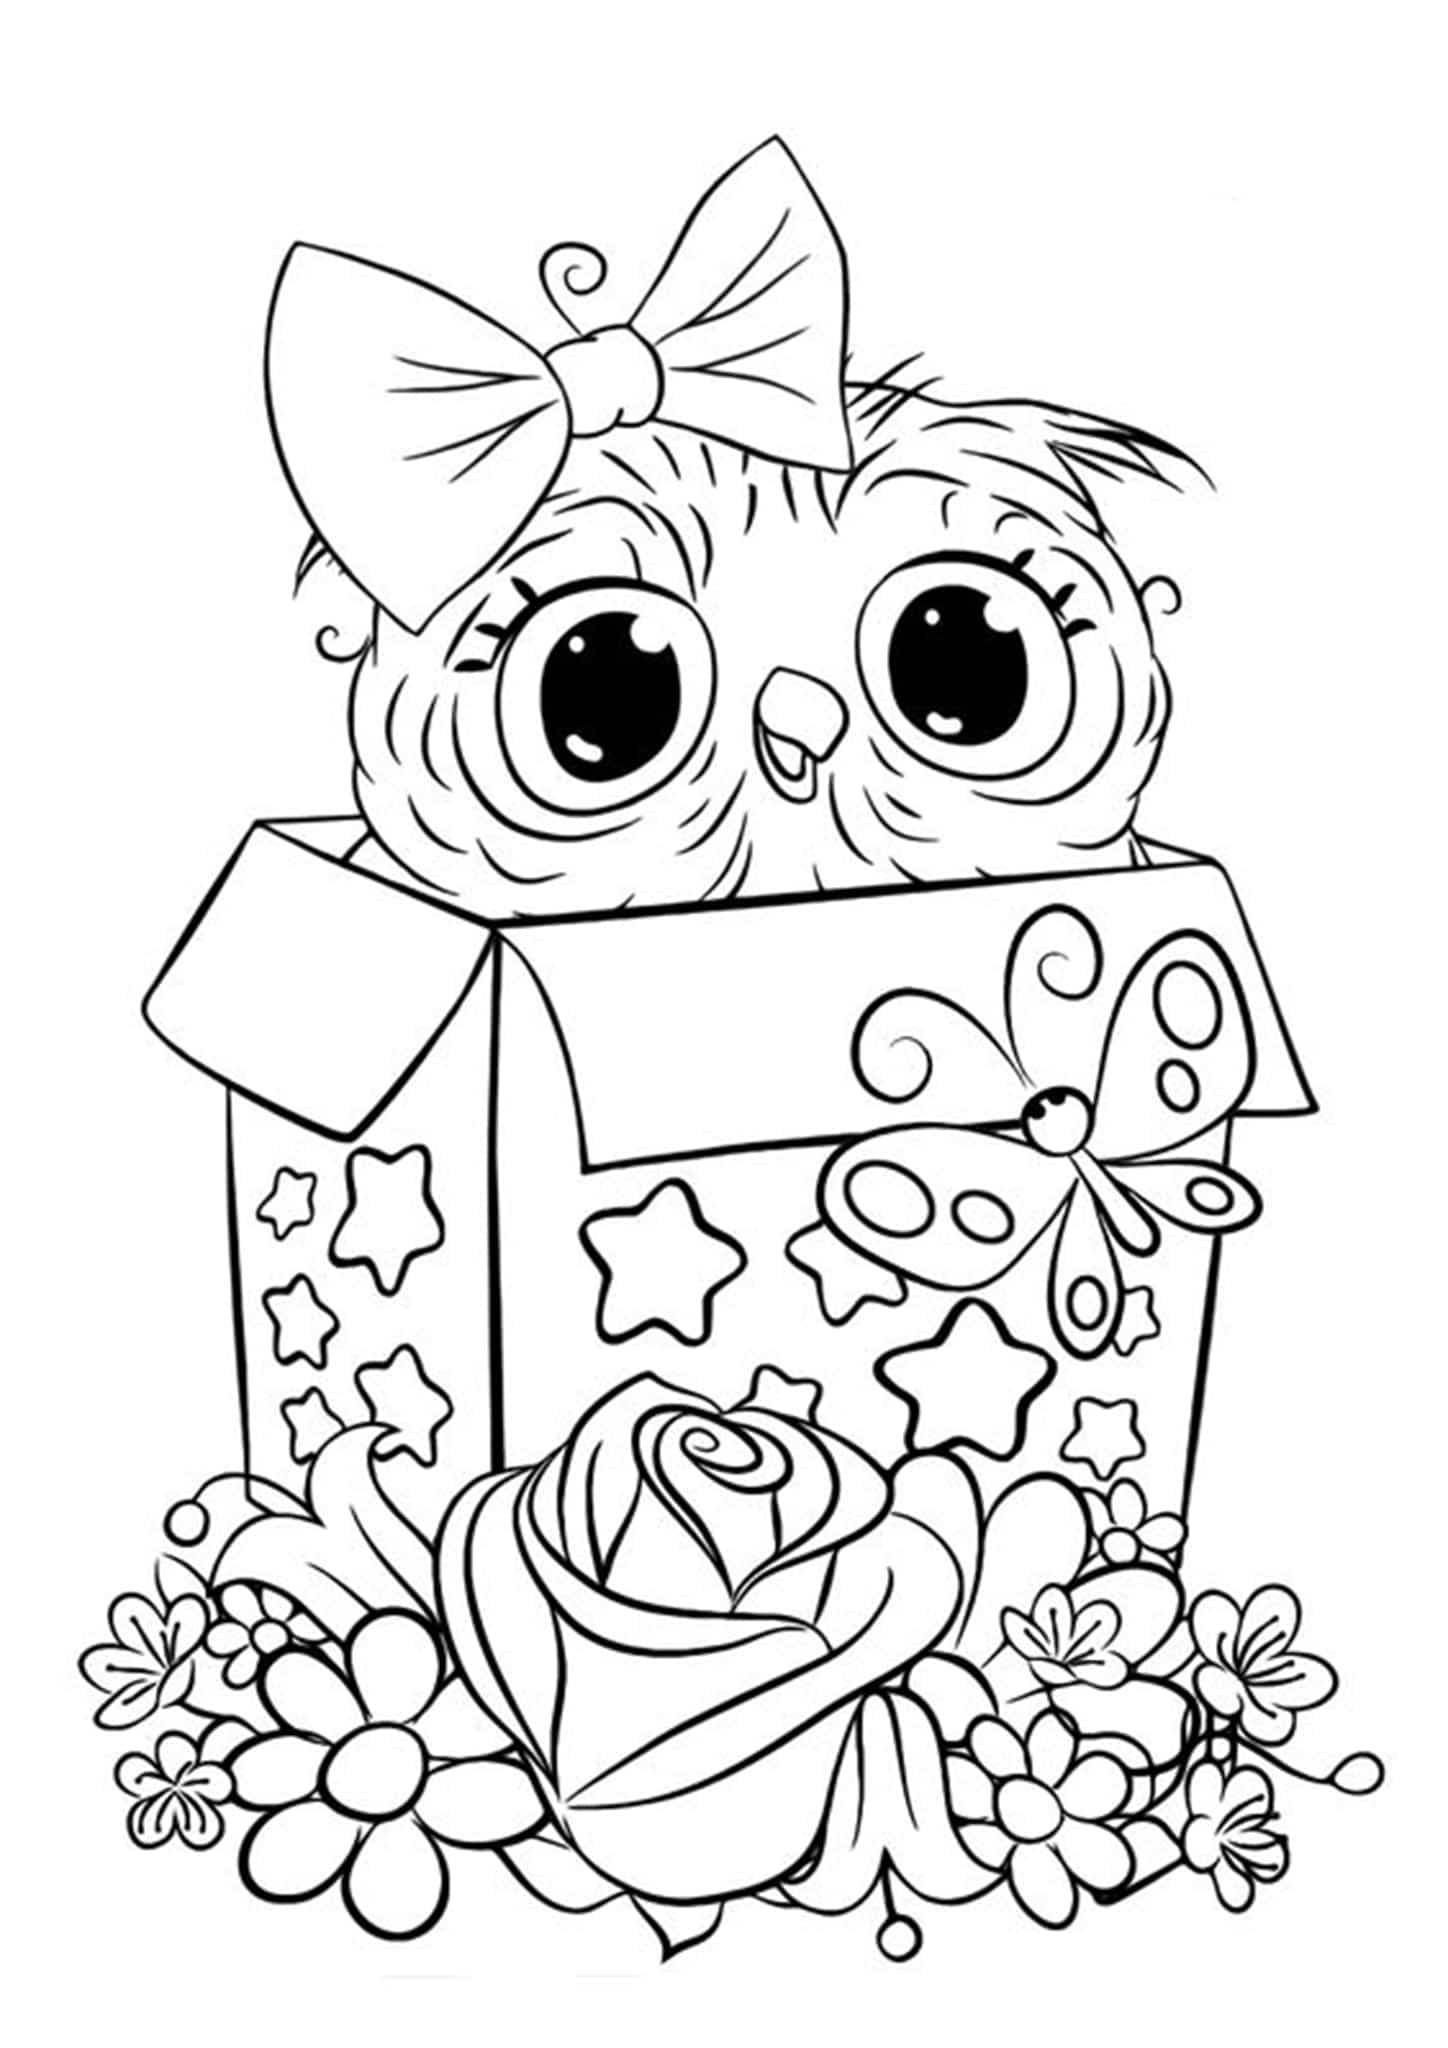 Download Free & Easy To Print Owl Coloring Pages - Tulamama